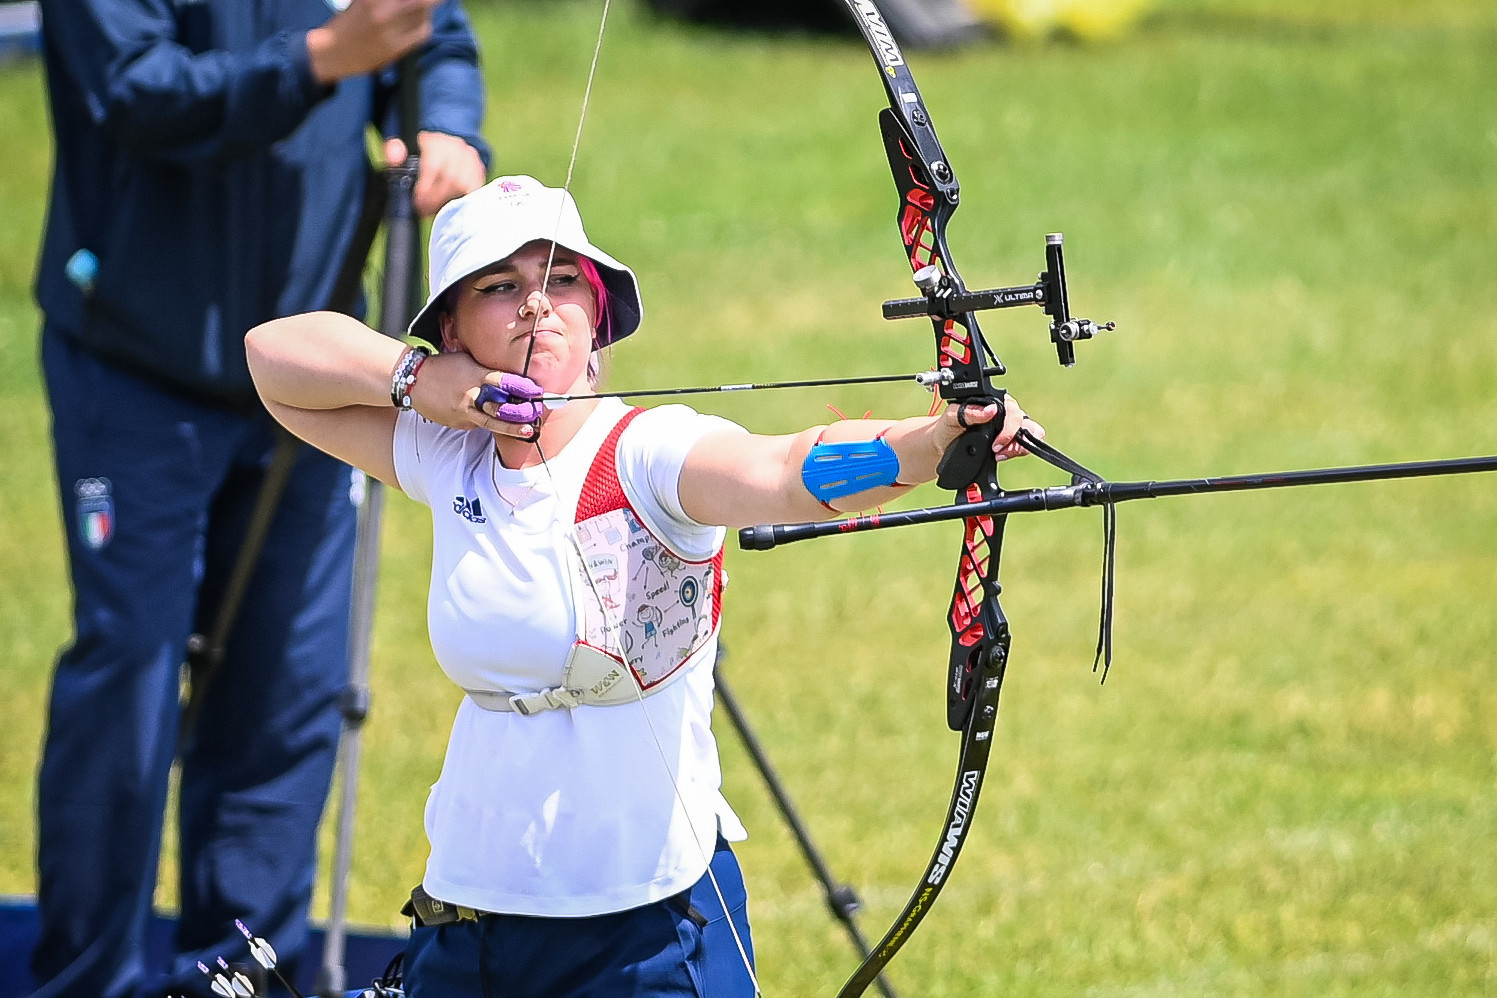 Double gold for Britain’s recurve archer Healey